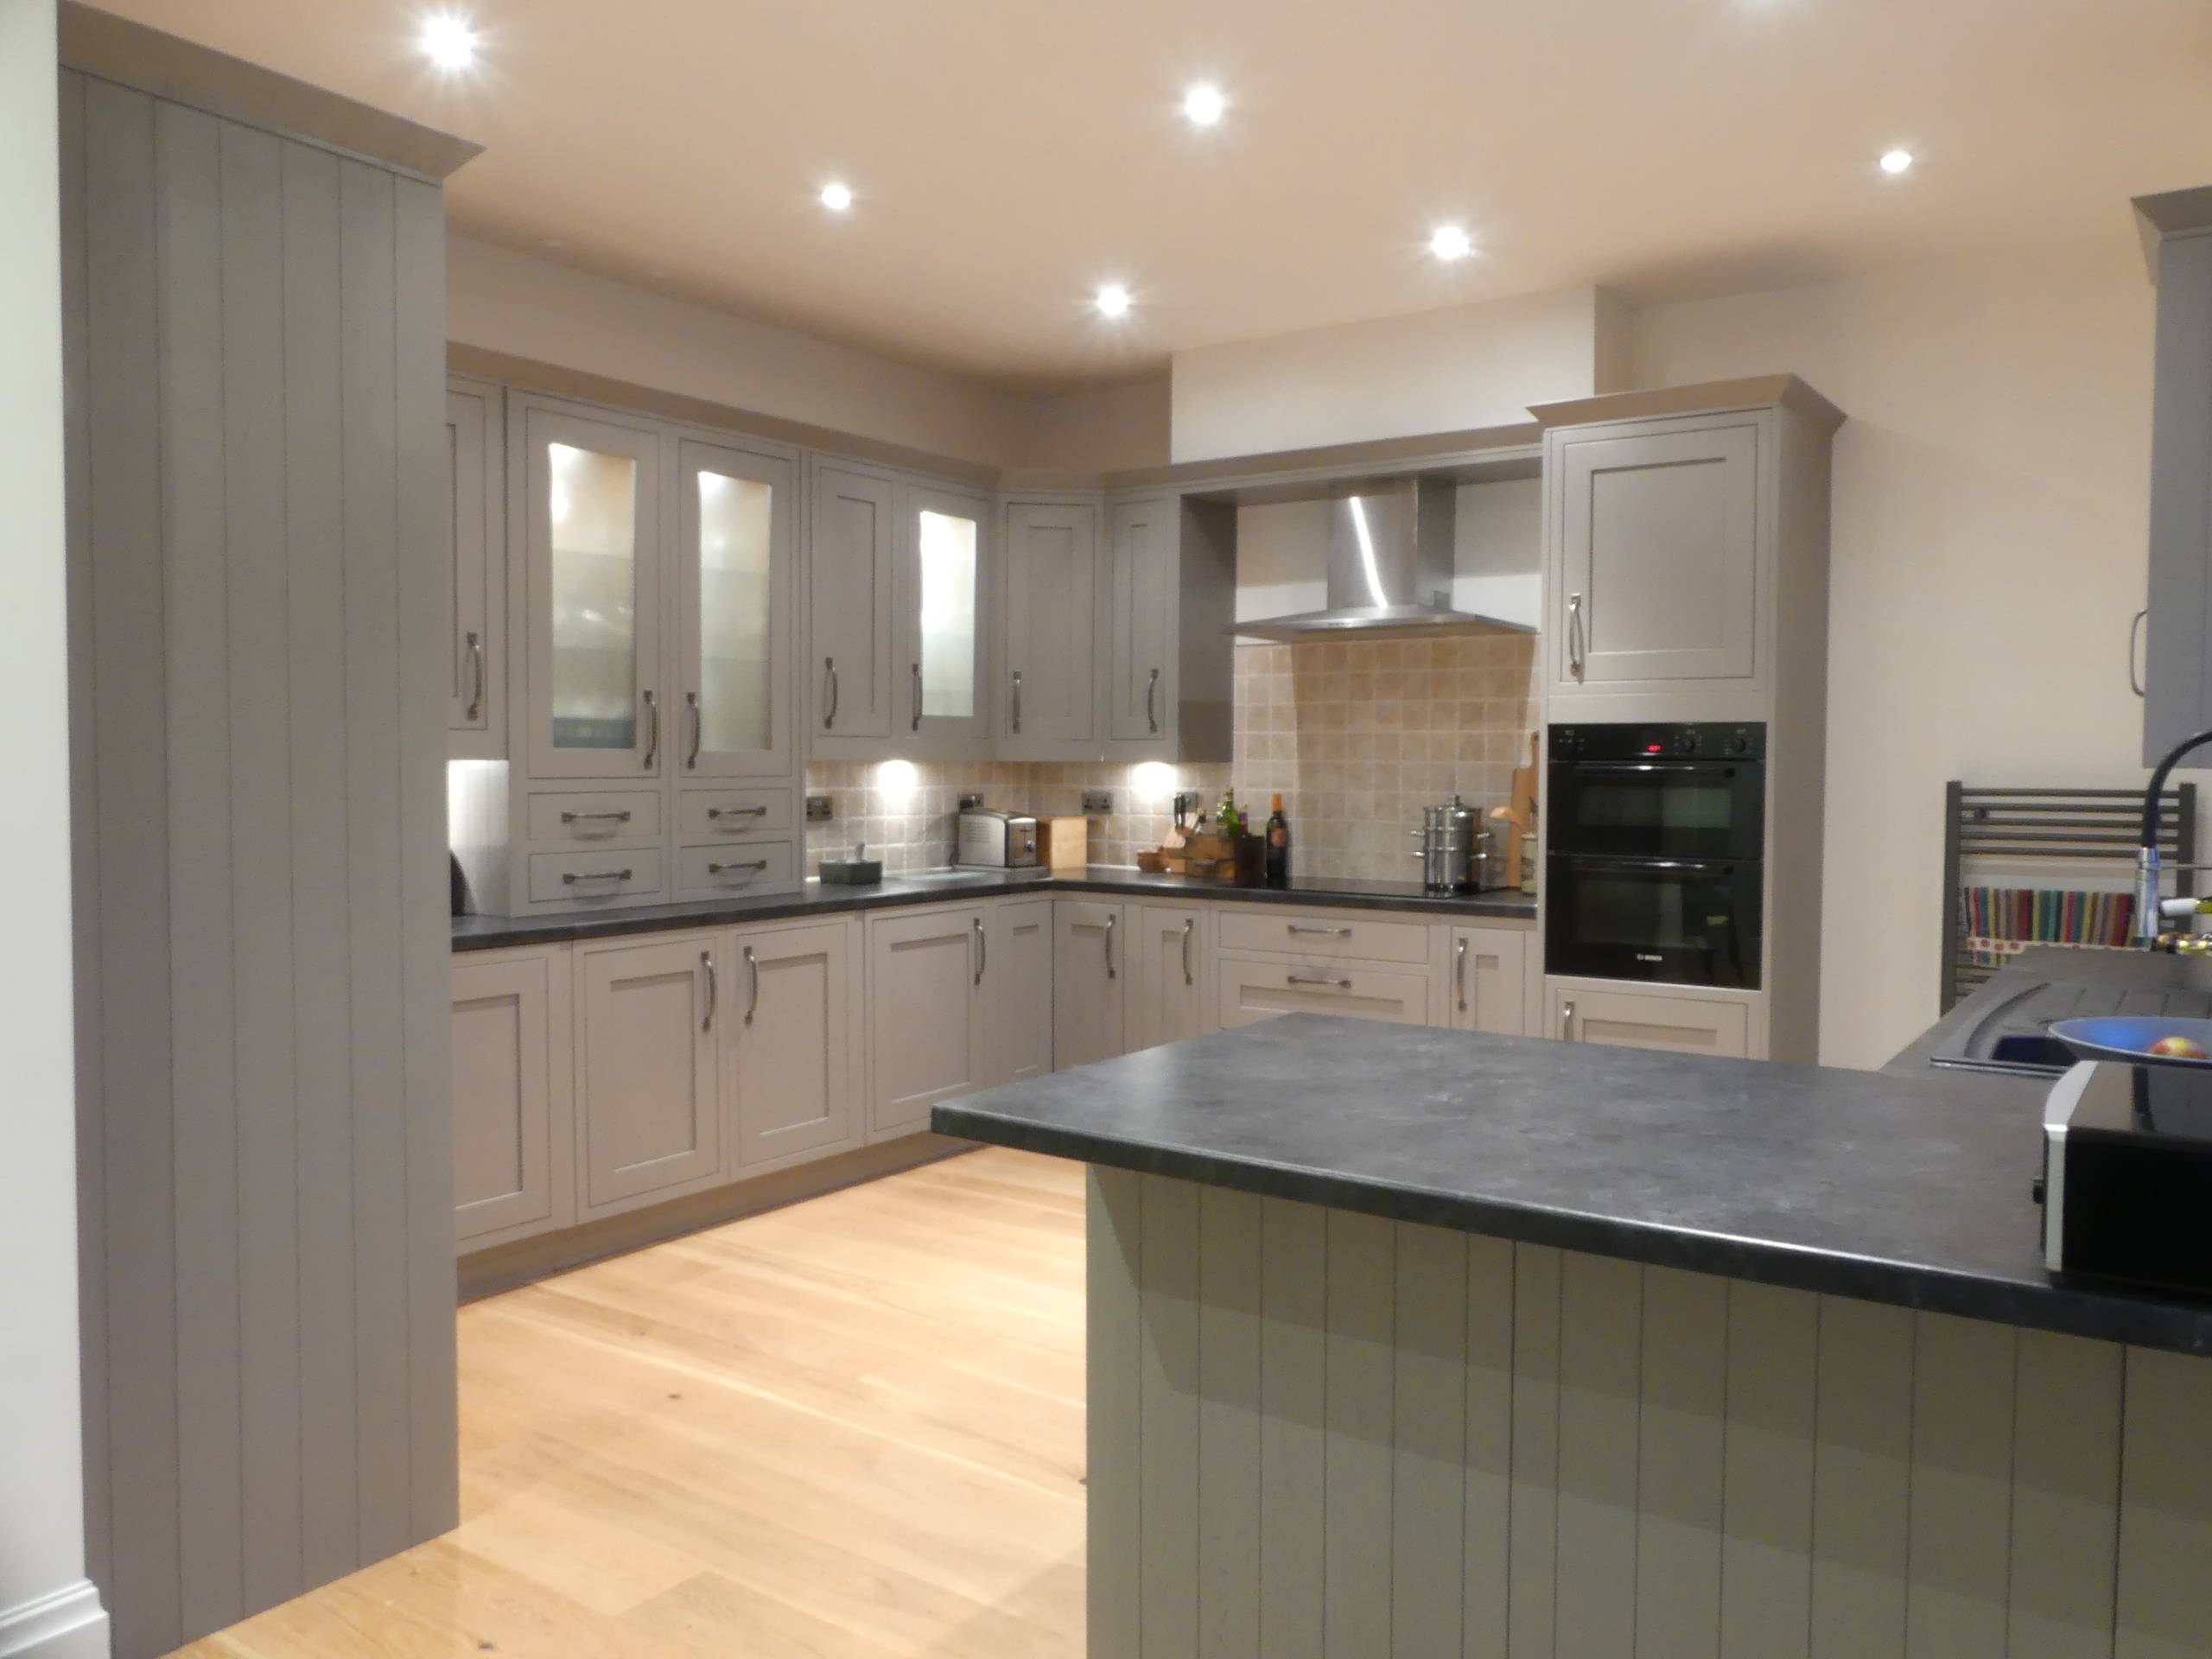 Kitchen and house refurb project.